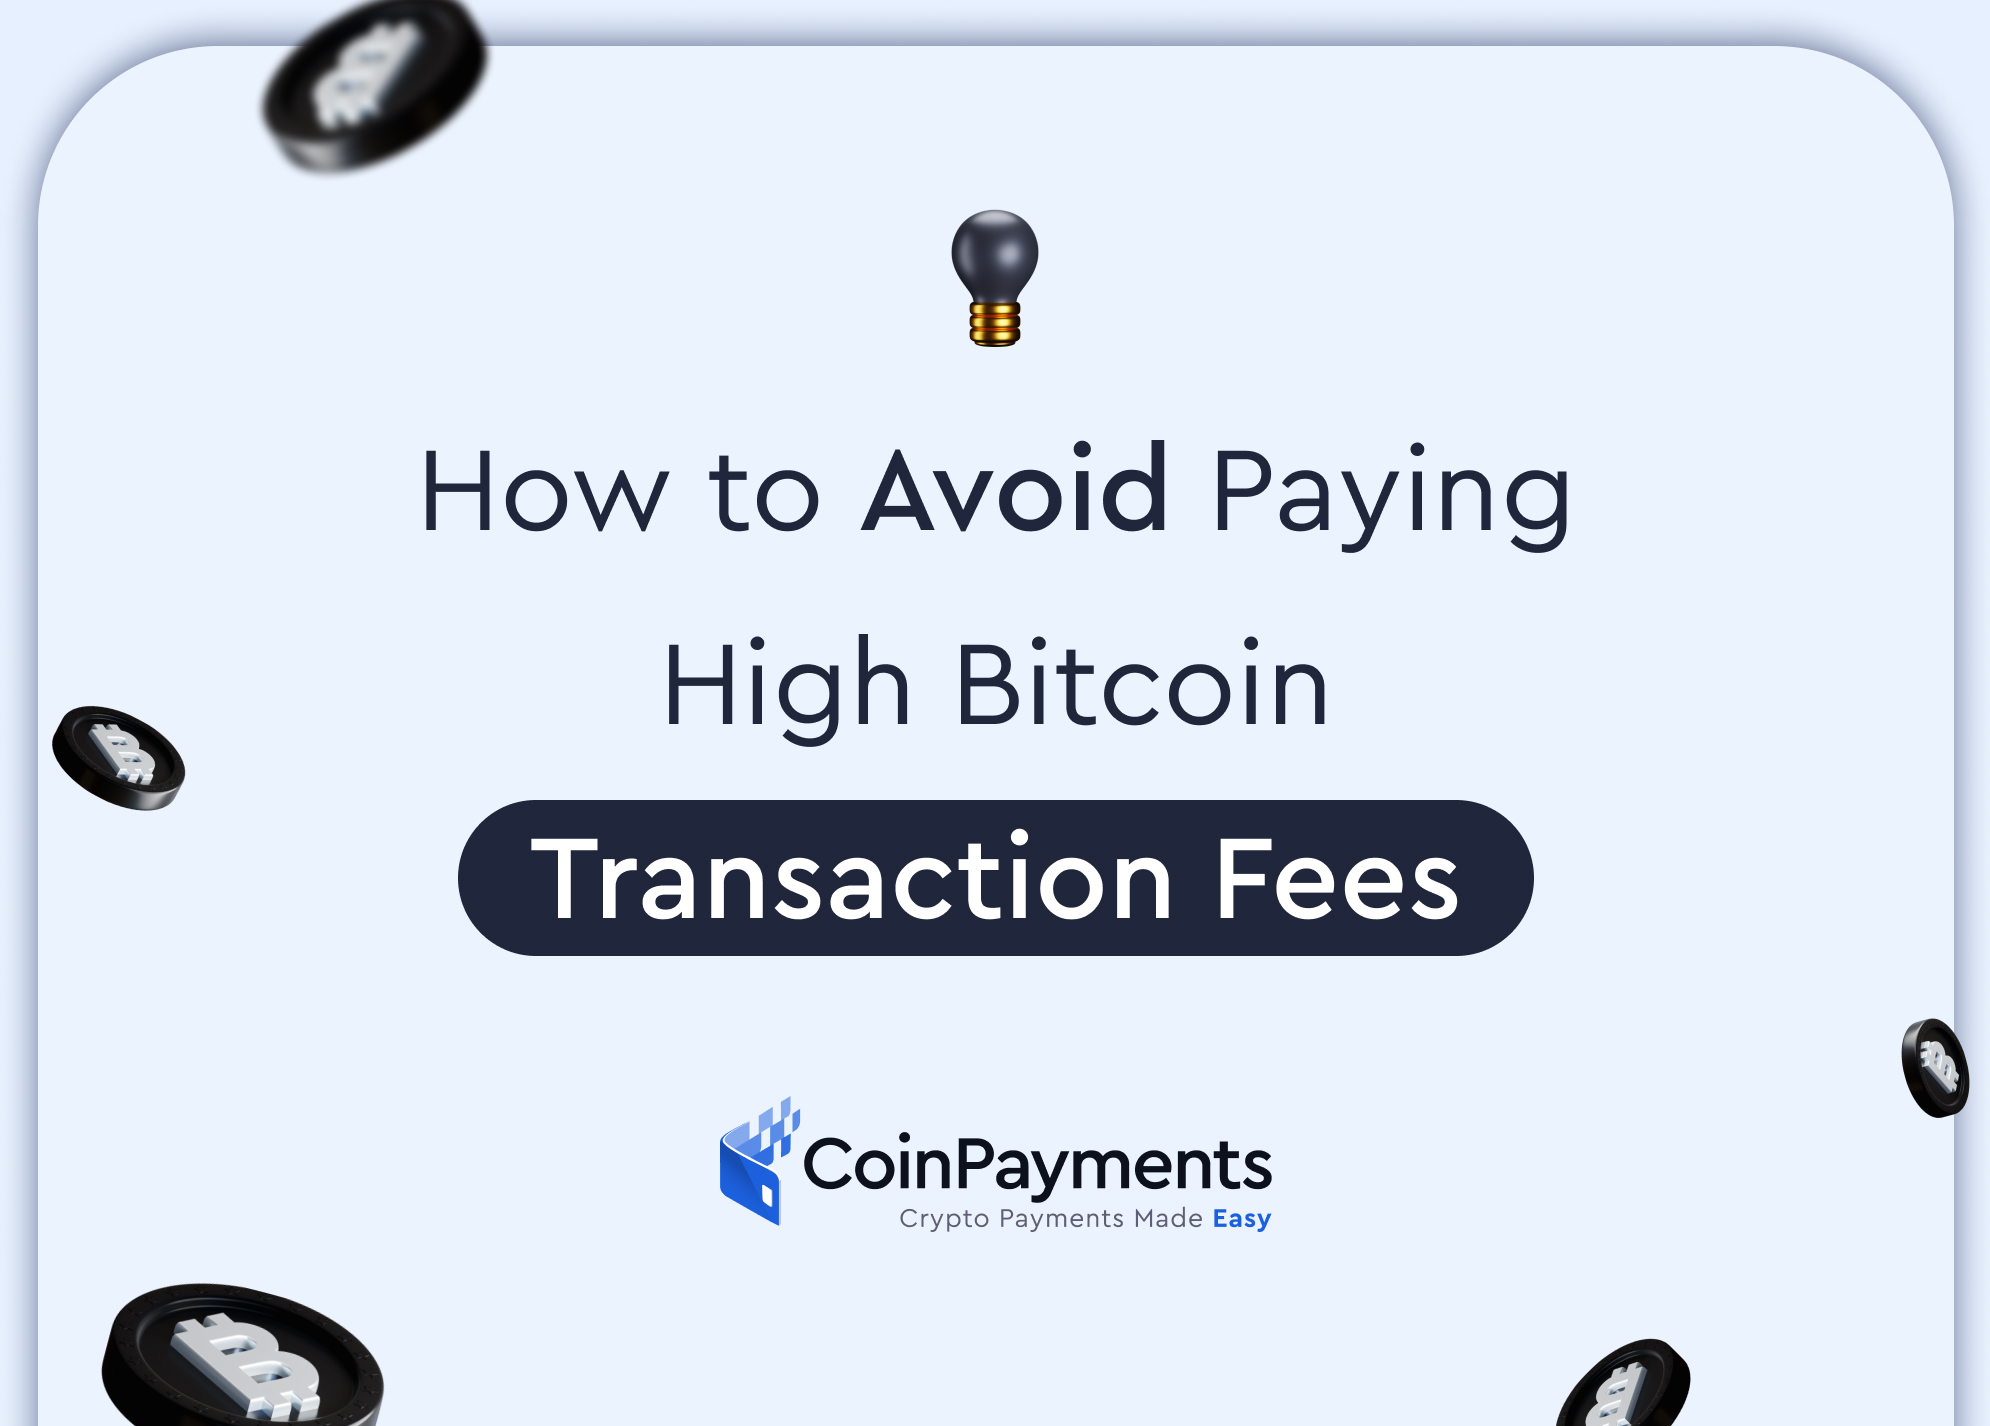 How-to-Avoid-Paying-High-Bitcoin-Transaction-Fees_web